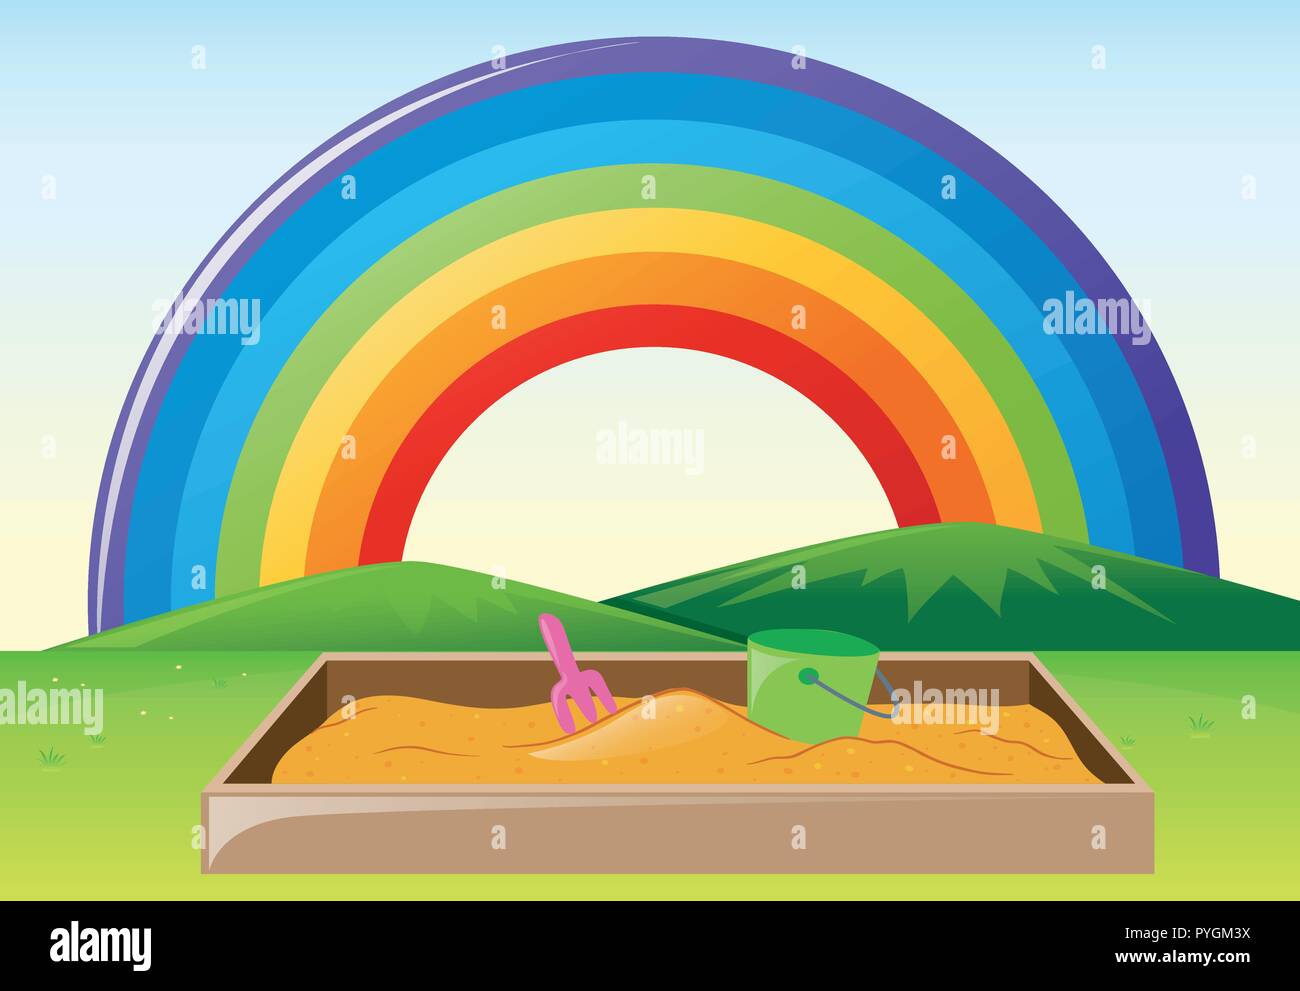 Park scene with sandpit and rainbow illustration Stock Vector